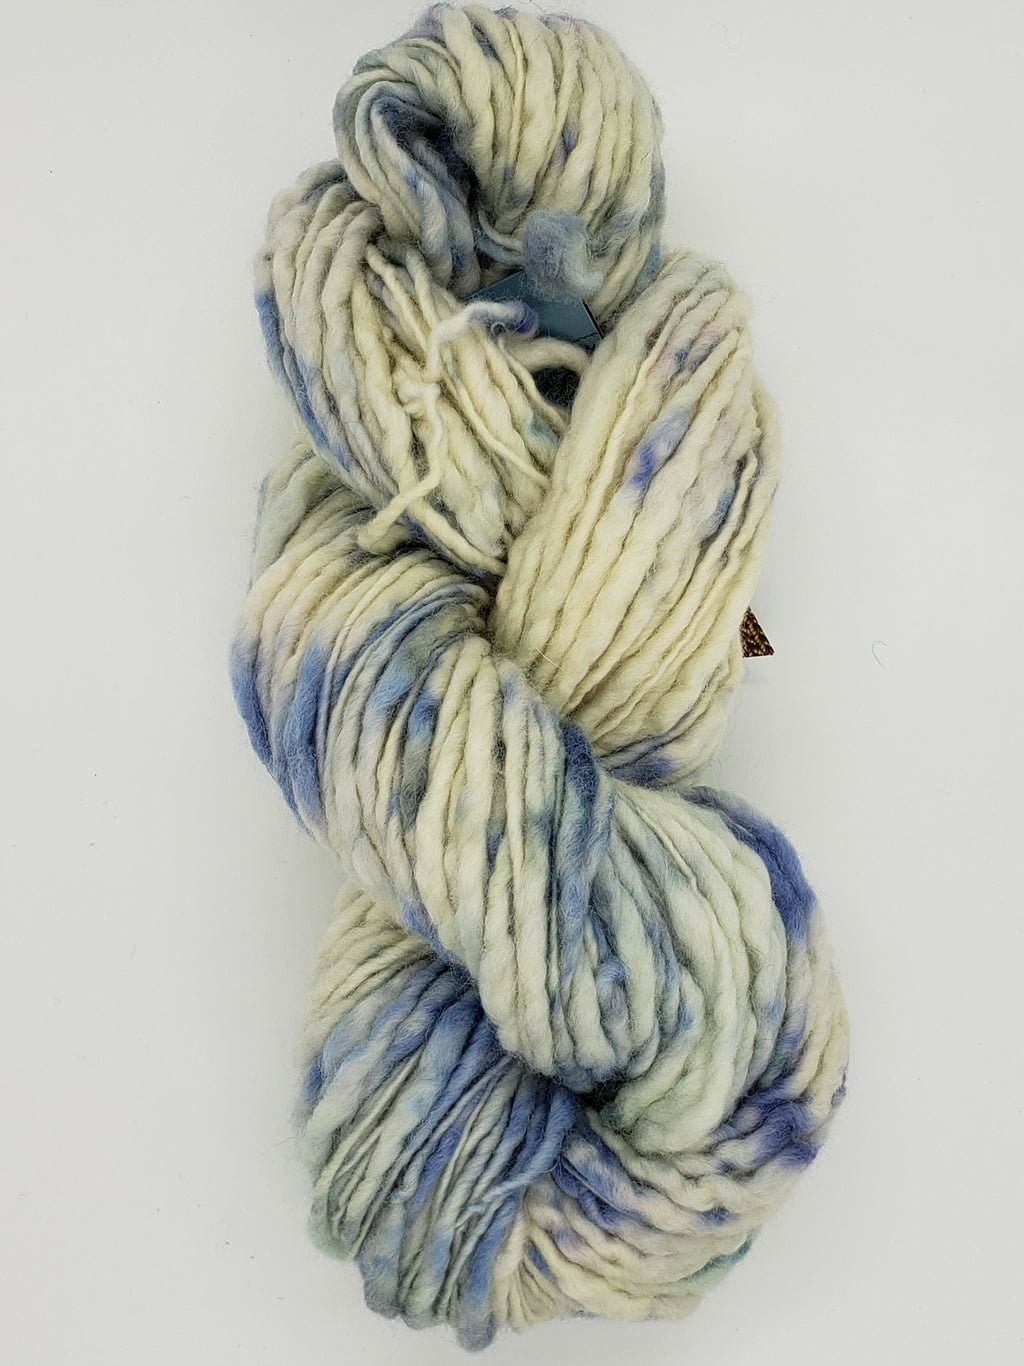 Slubby - GLOBE THISTLE -  Merino/Blue Face Leicester - Hand Dyed Textured Yarn Thick and Thin  -  Variegated Shades